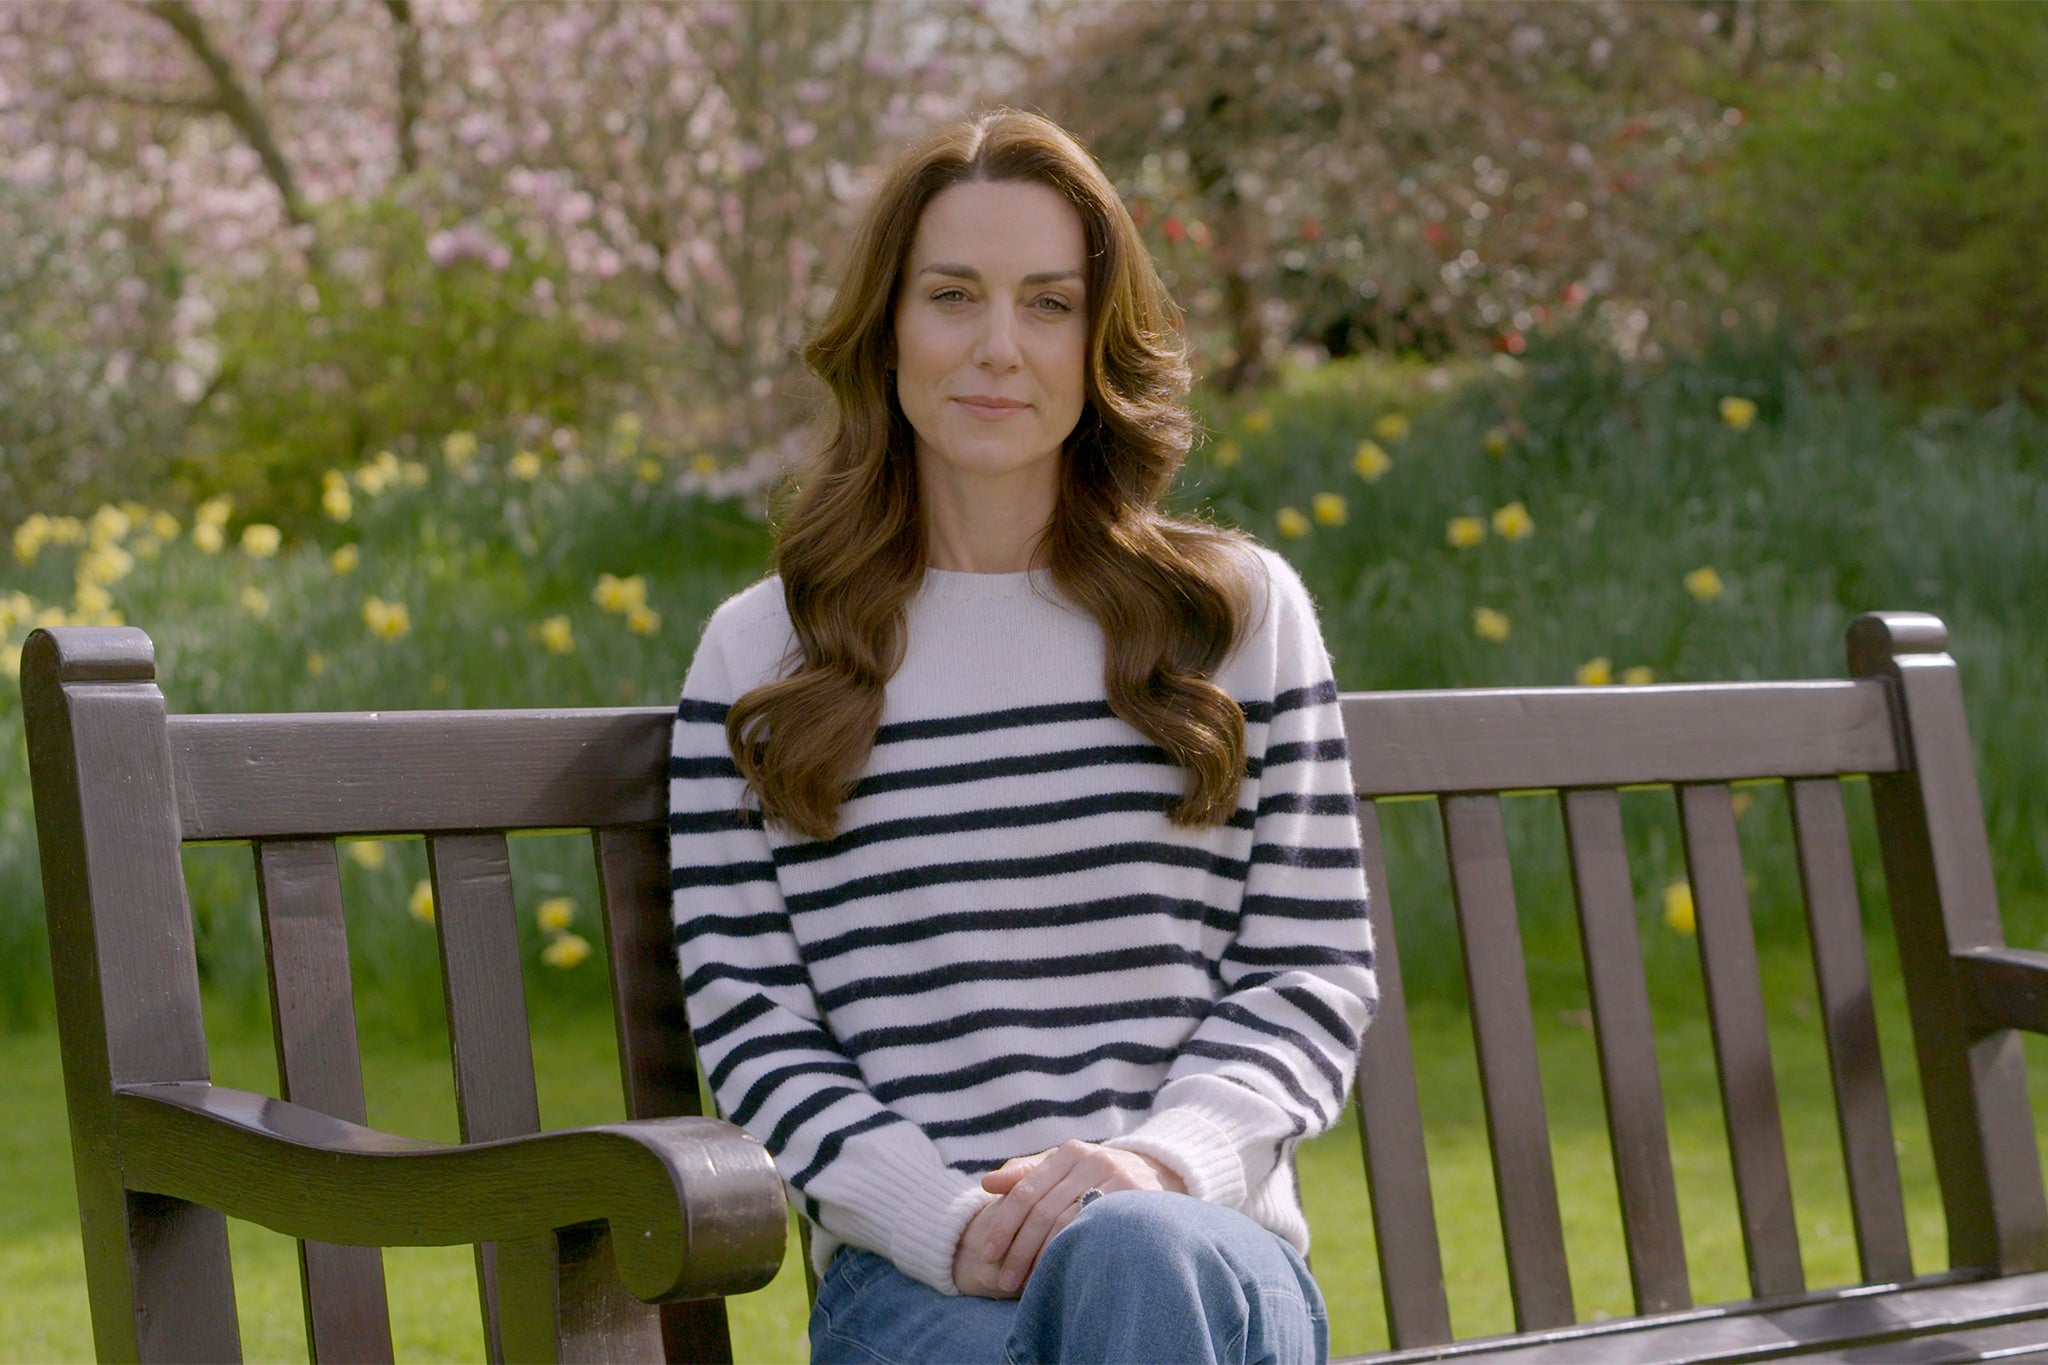 Kate recorded a deeply moving statement revealing her cancer diagnosis